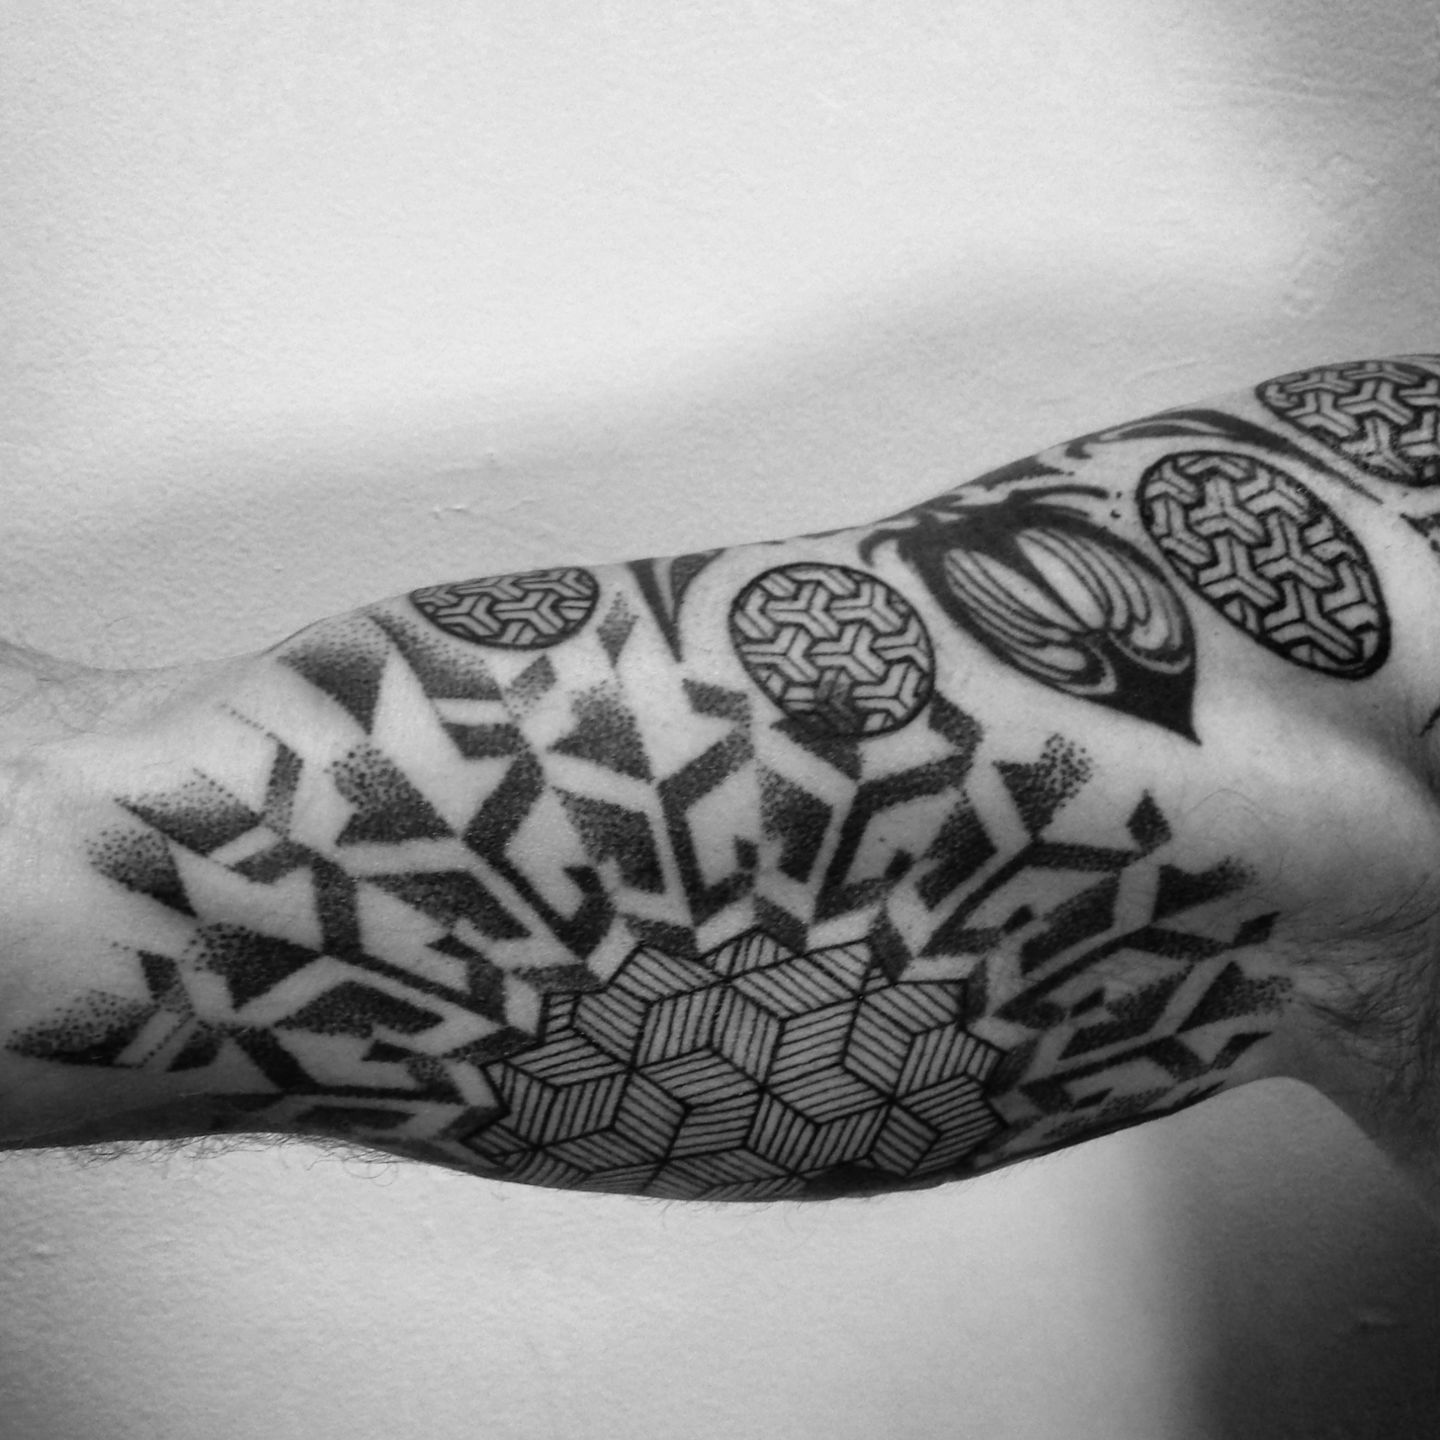 Dotwork Tattoos: A Complete Guide With 85 Images - AuthorityTattoo